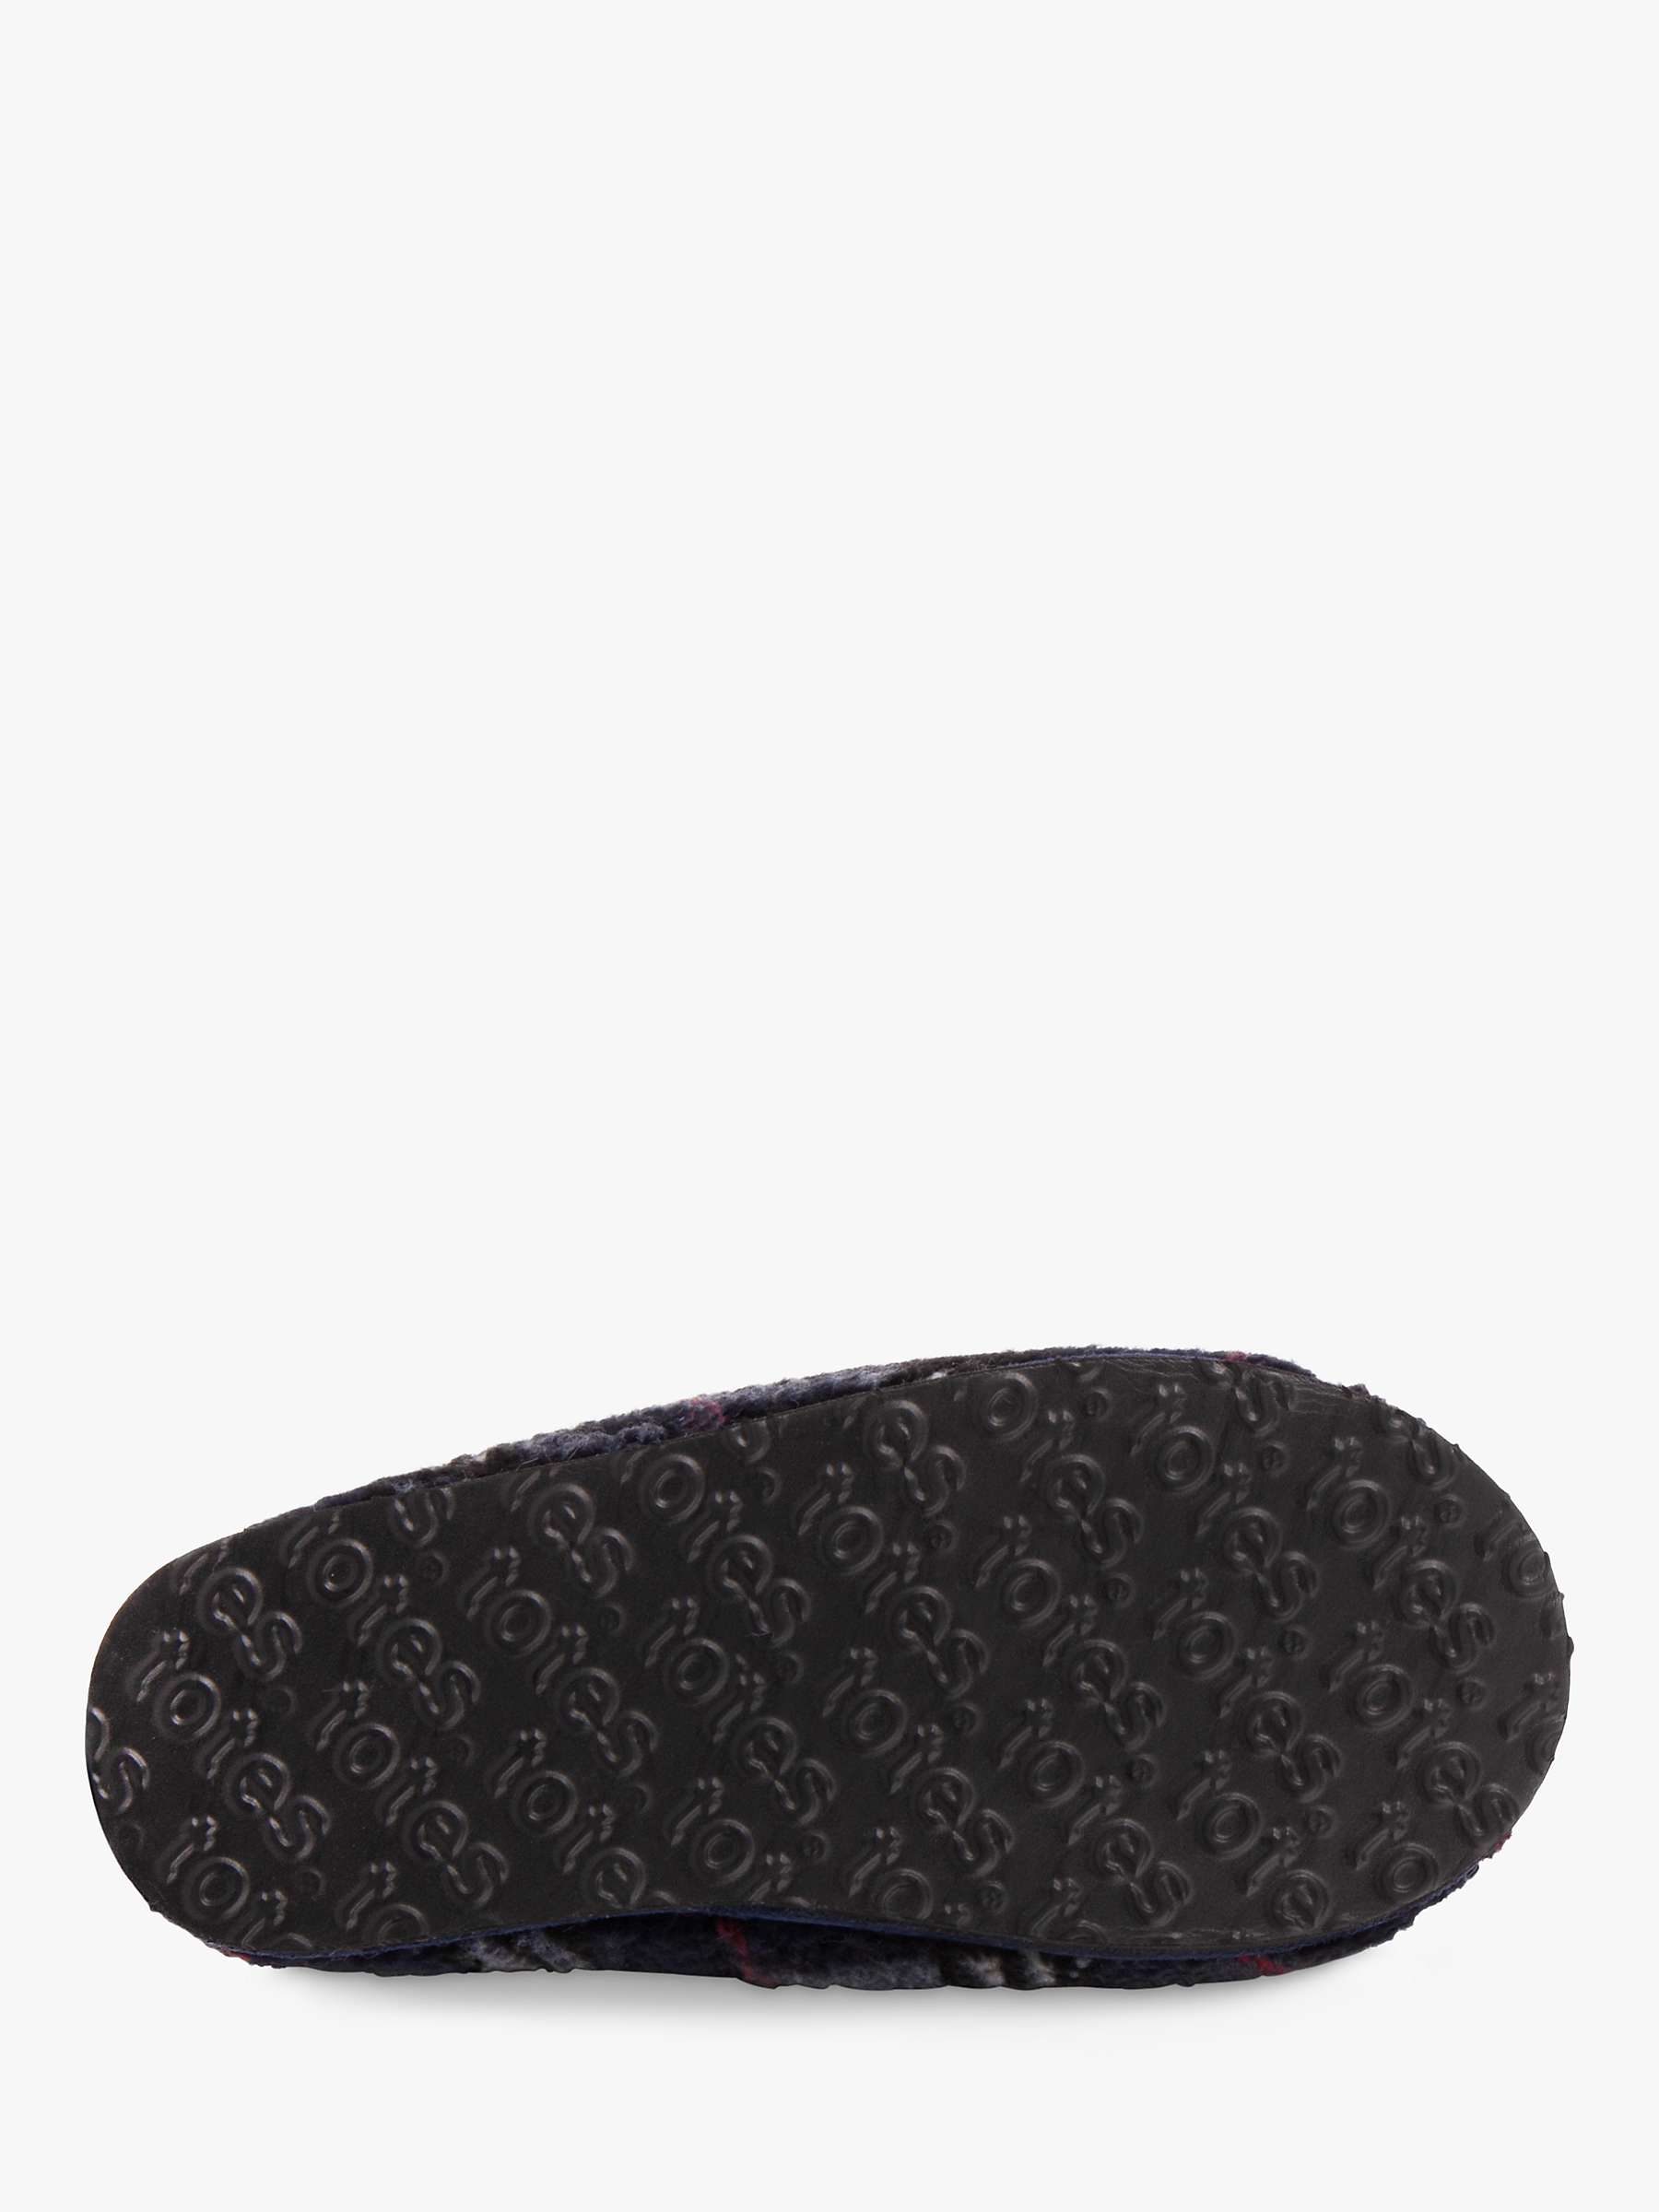 Buy totes Kids' Borg Check Mule Slippers, Navy Online at johnlewis.com